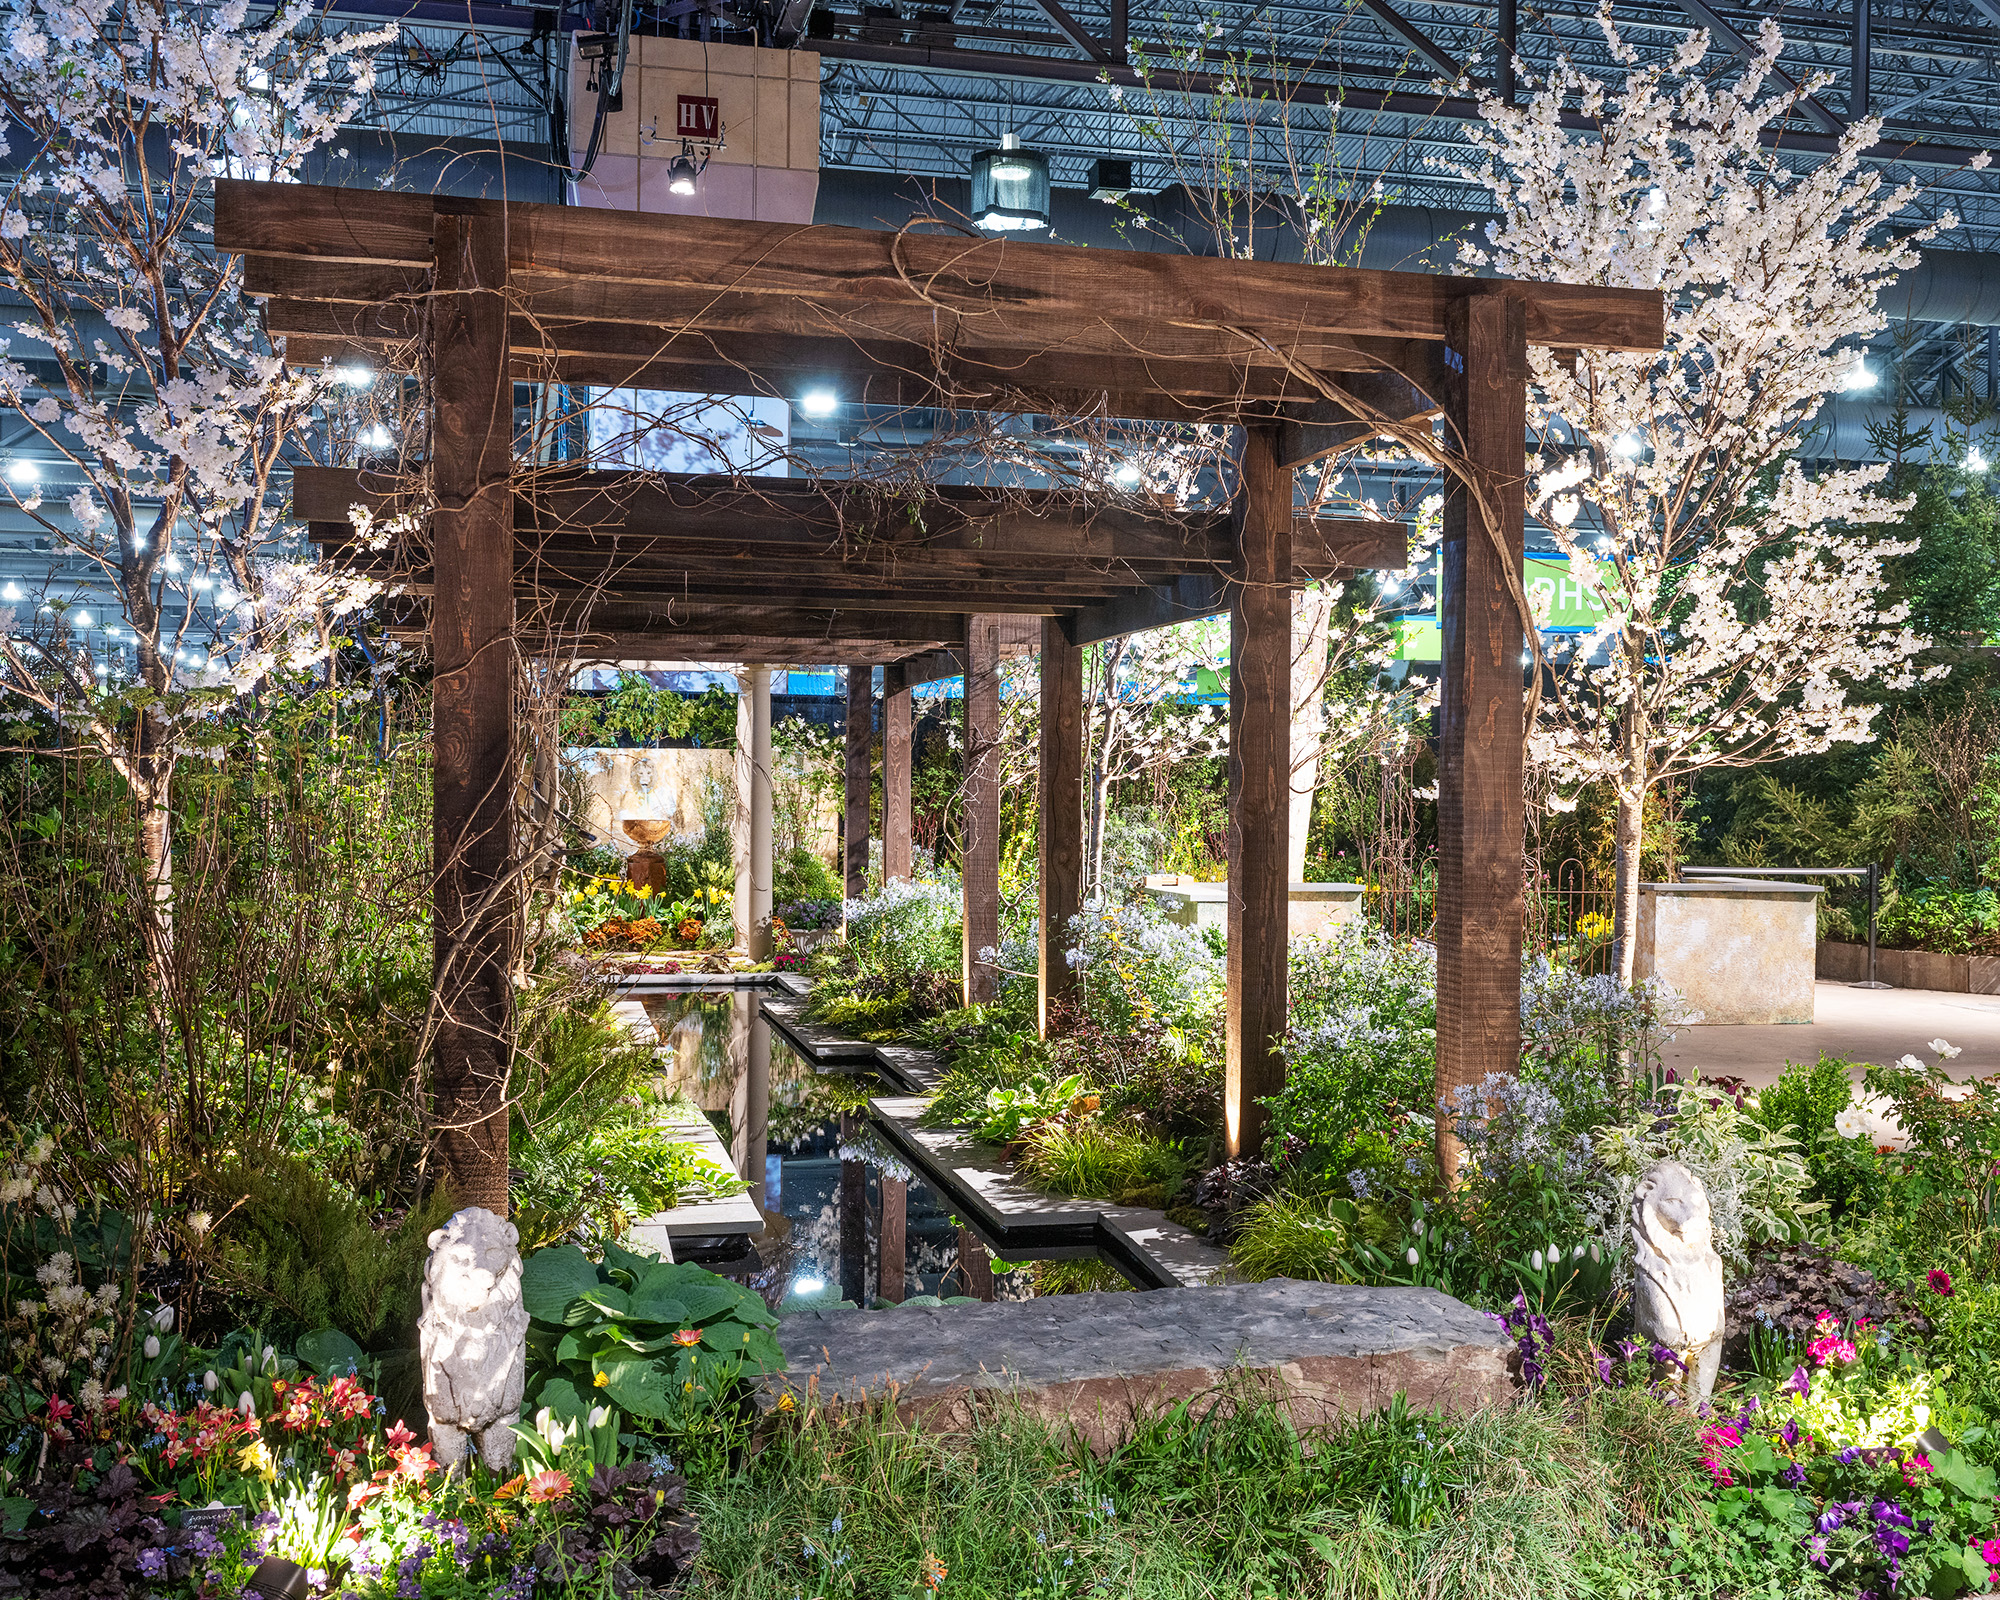 Irwin Landscaping and Prairie Wind Lost Garden pergola water feature at Philadelphia Flower Show